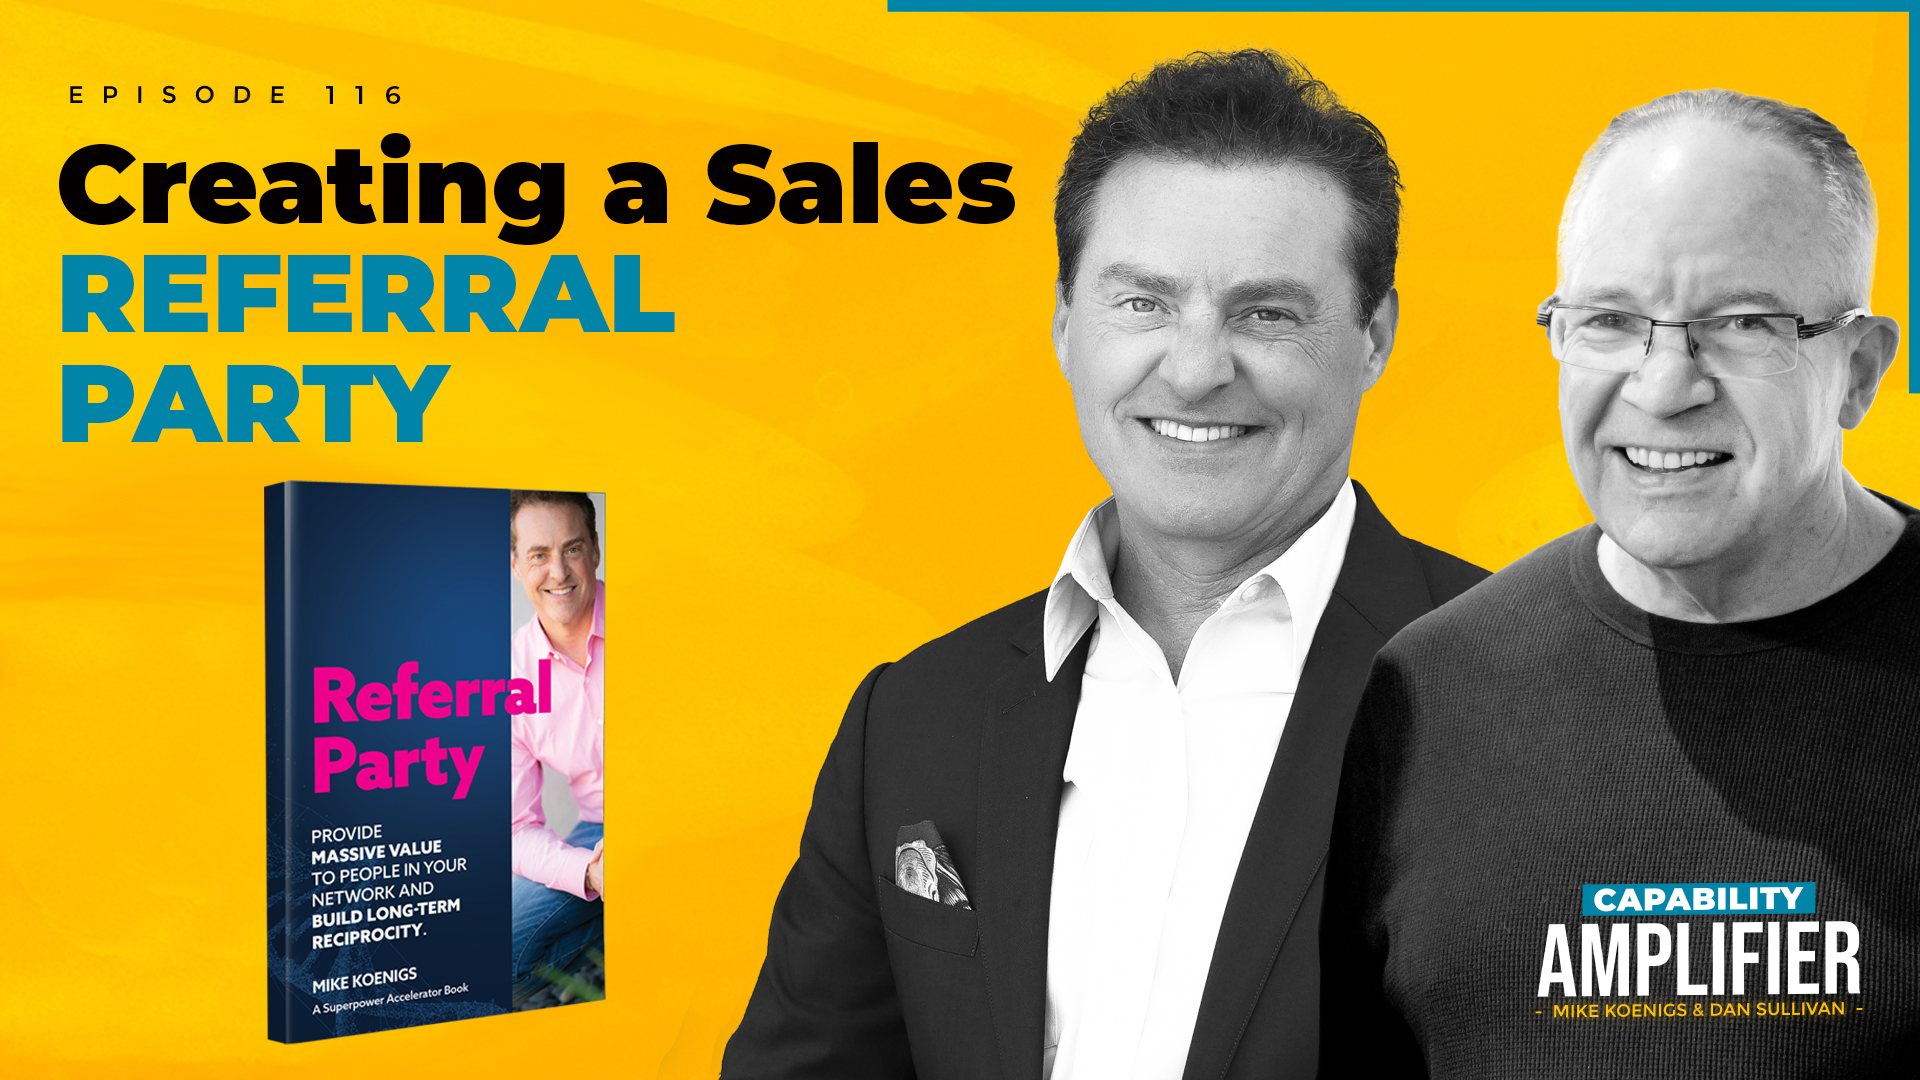 Episode 116 Art: Text reading "Creating a Sales REFERRAL PARTY" on a yellow background with photos of Mike Koenigs, Dan Sullivan and a book cover with the word "Referral Party"